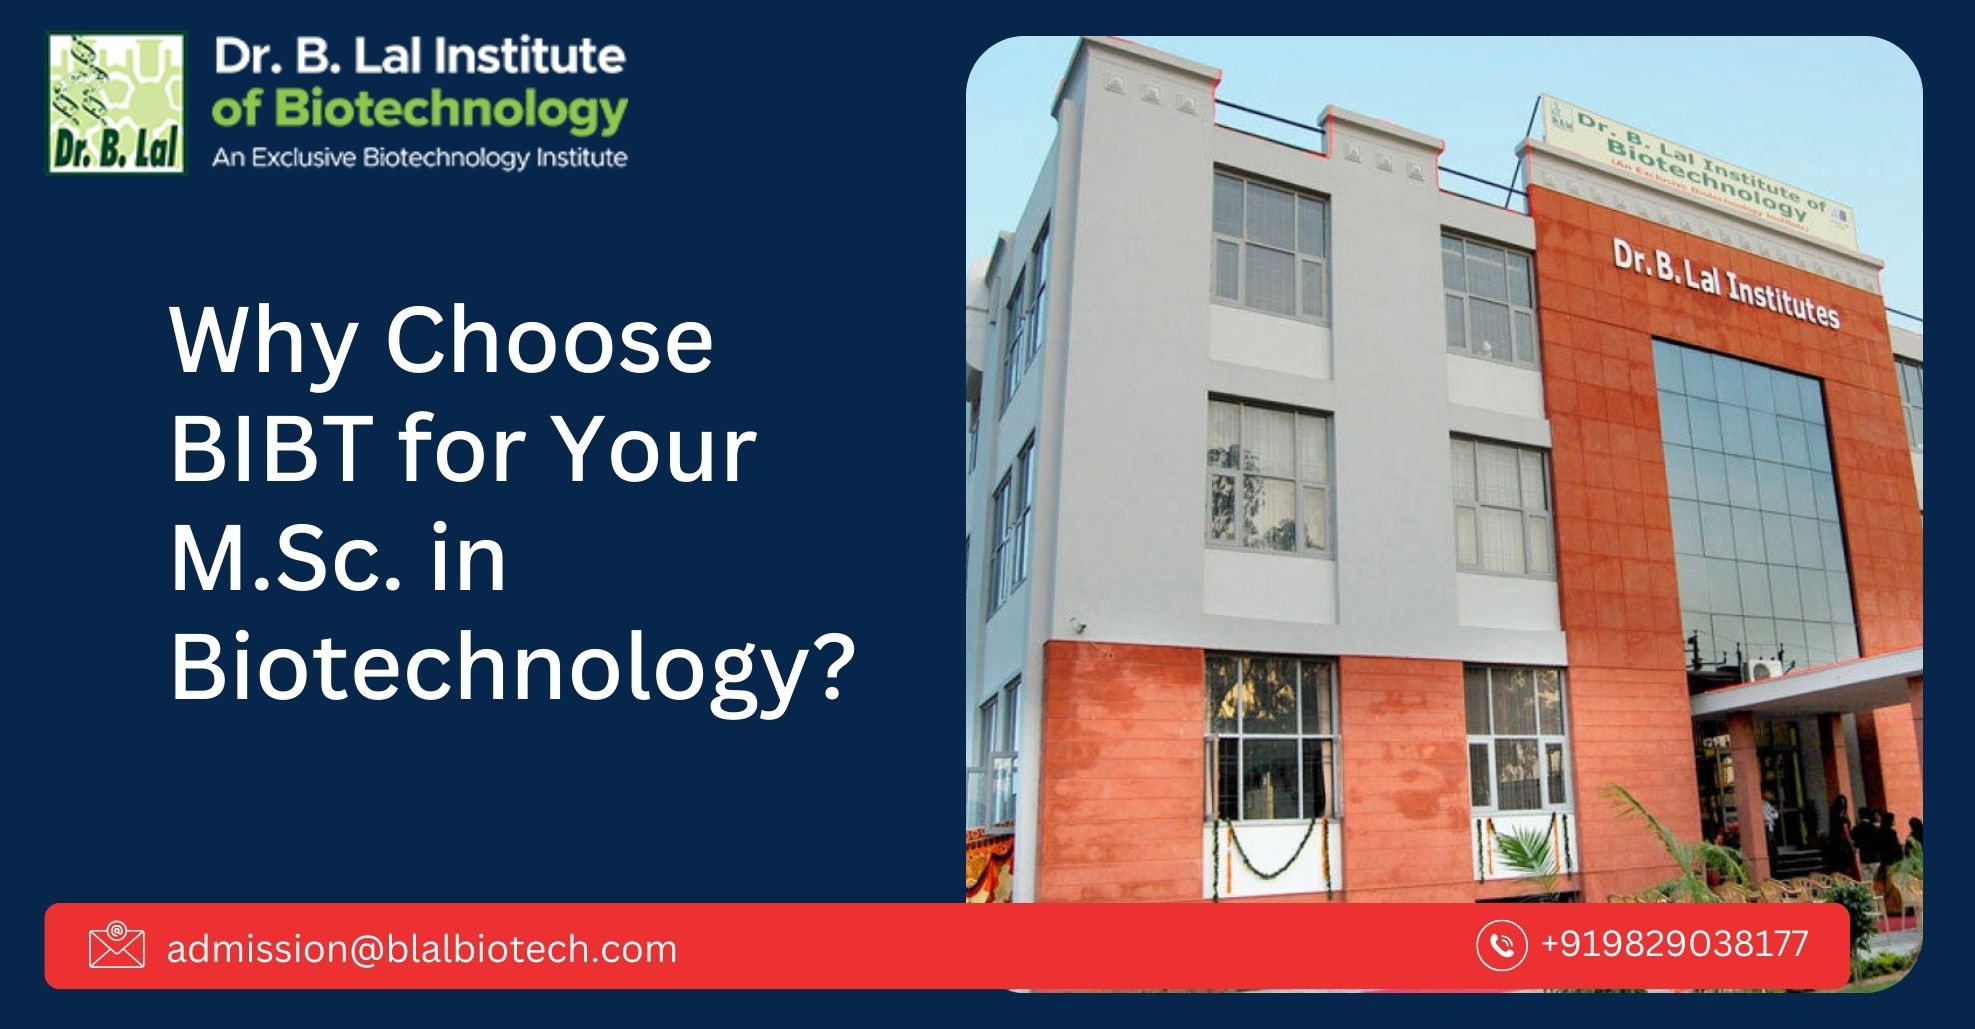 Why Choose BIBT for Your M.Sc. in Biotechnology?